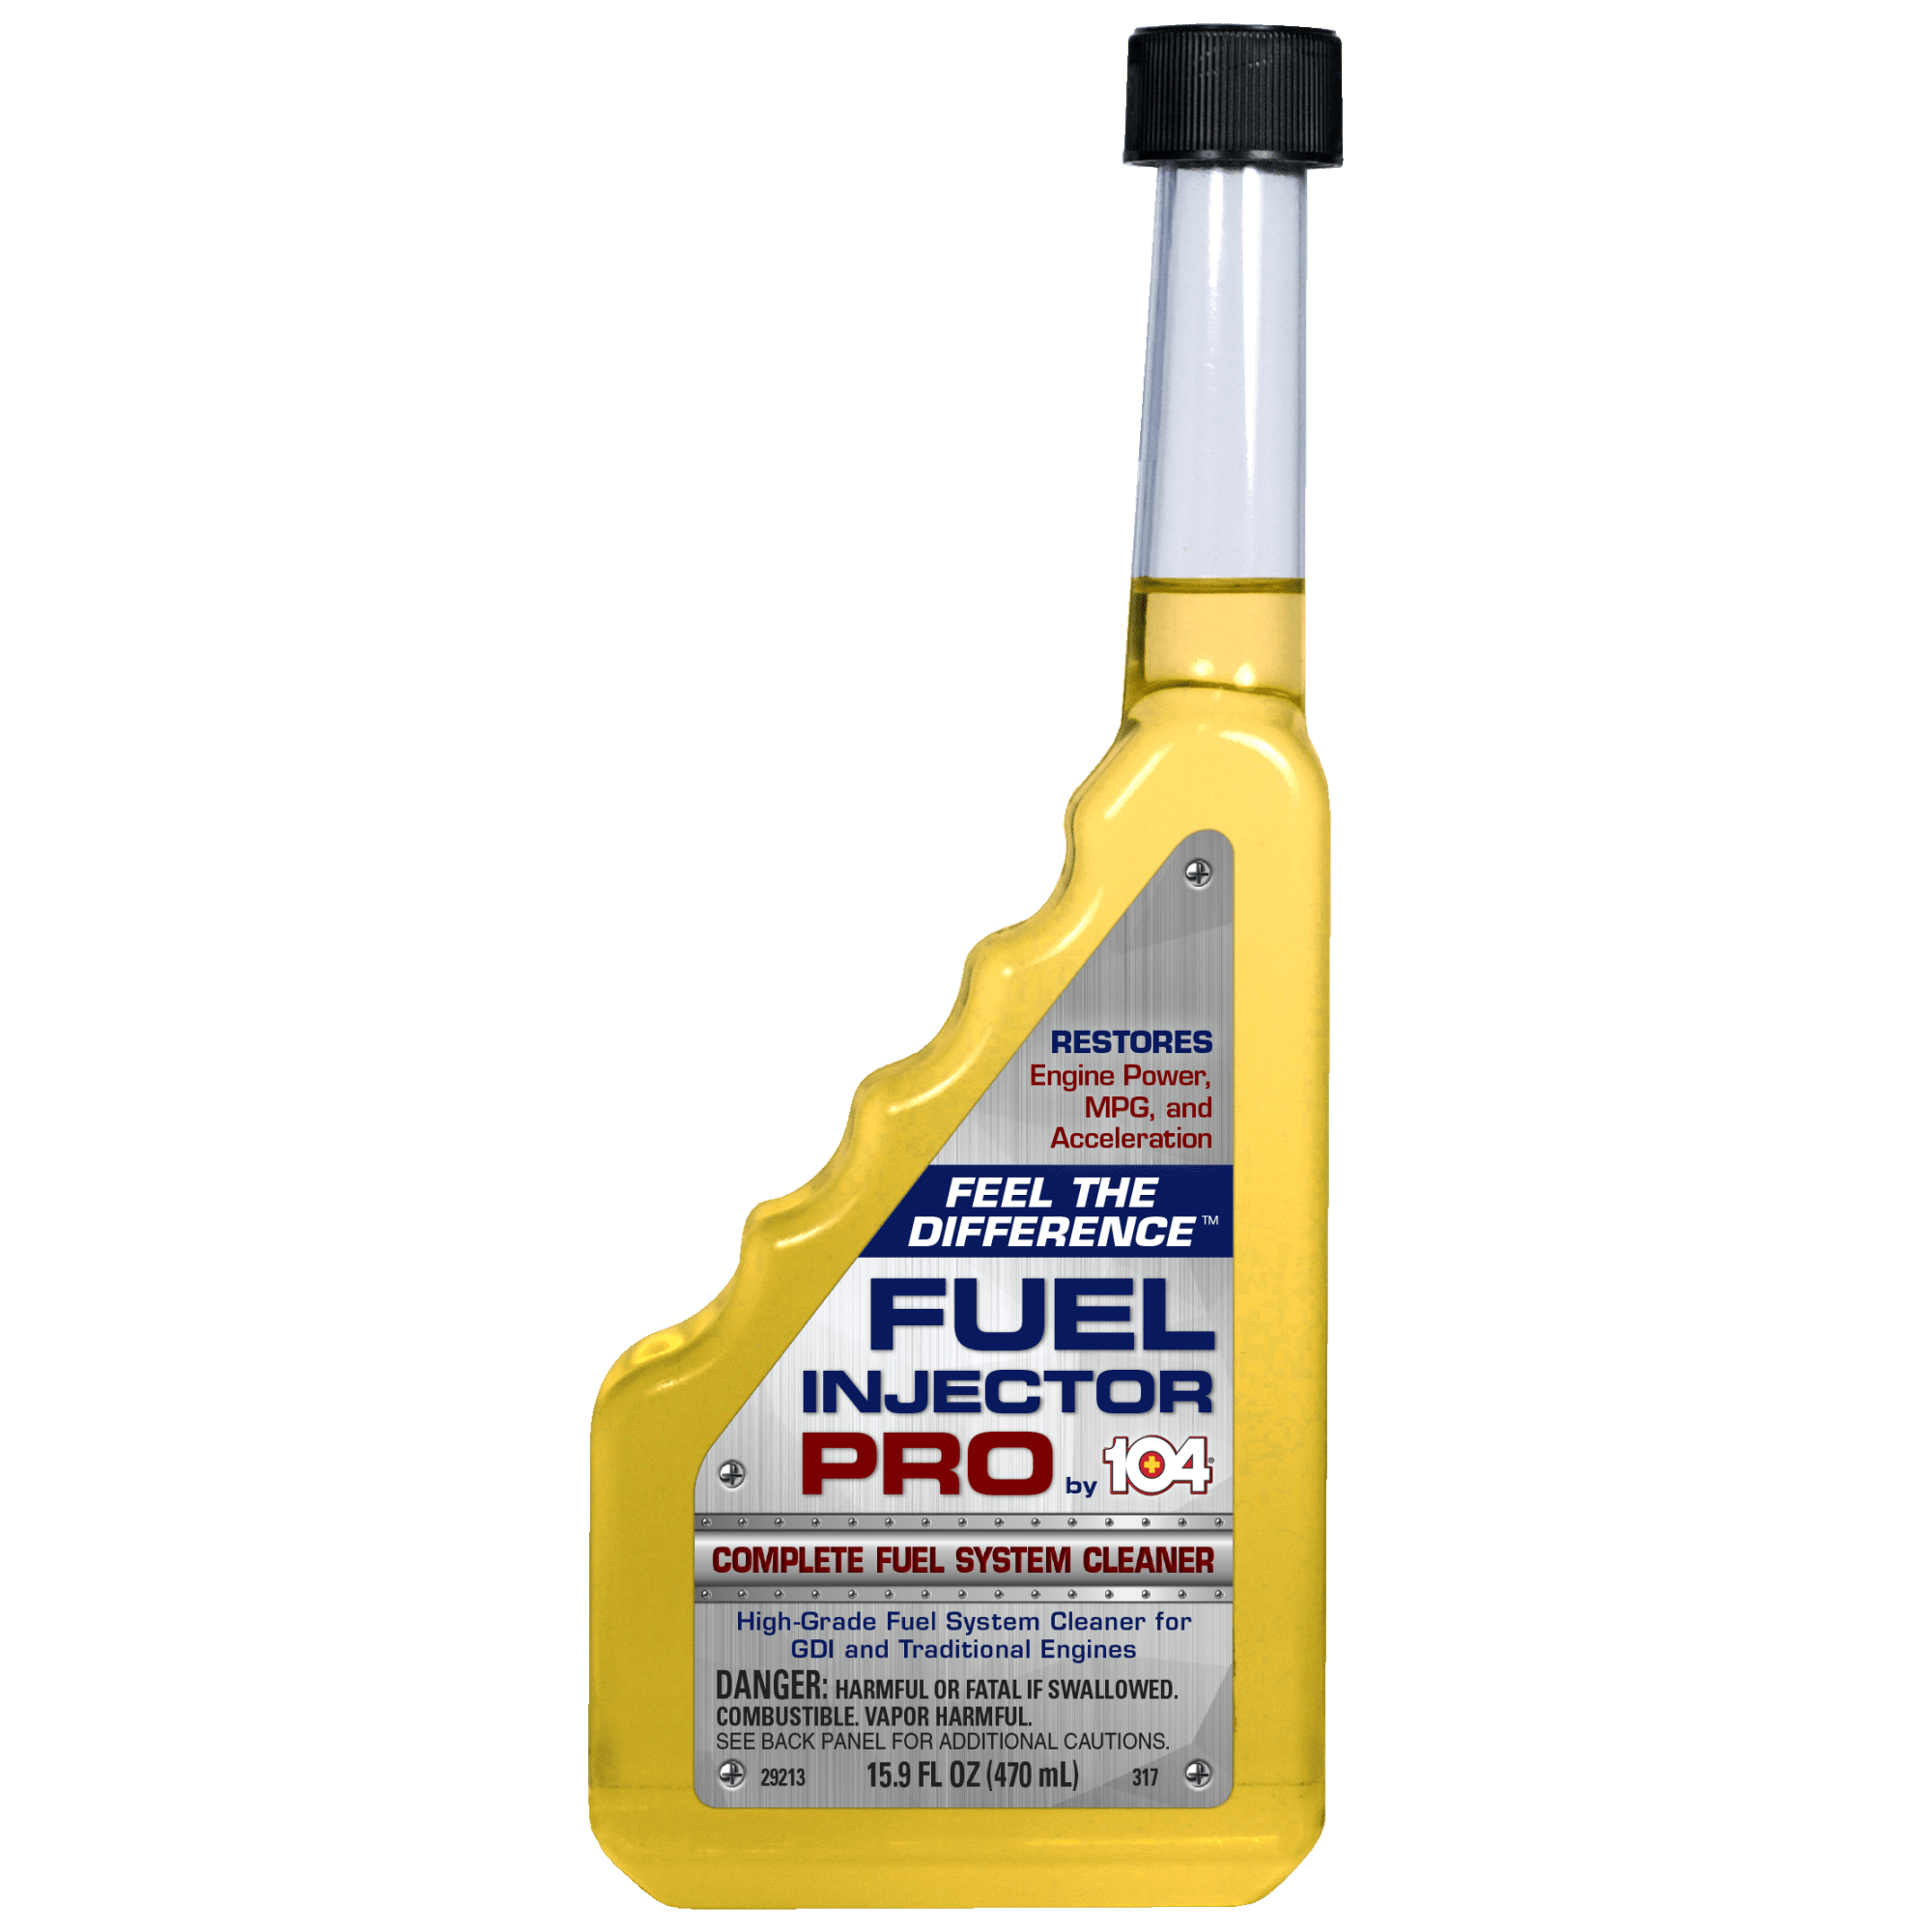 104+ Performance Fuel Injector Pro - Complete Fuel System Cleaner